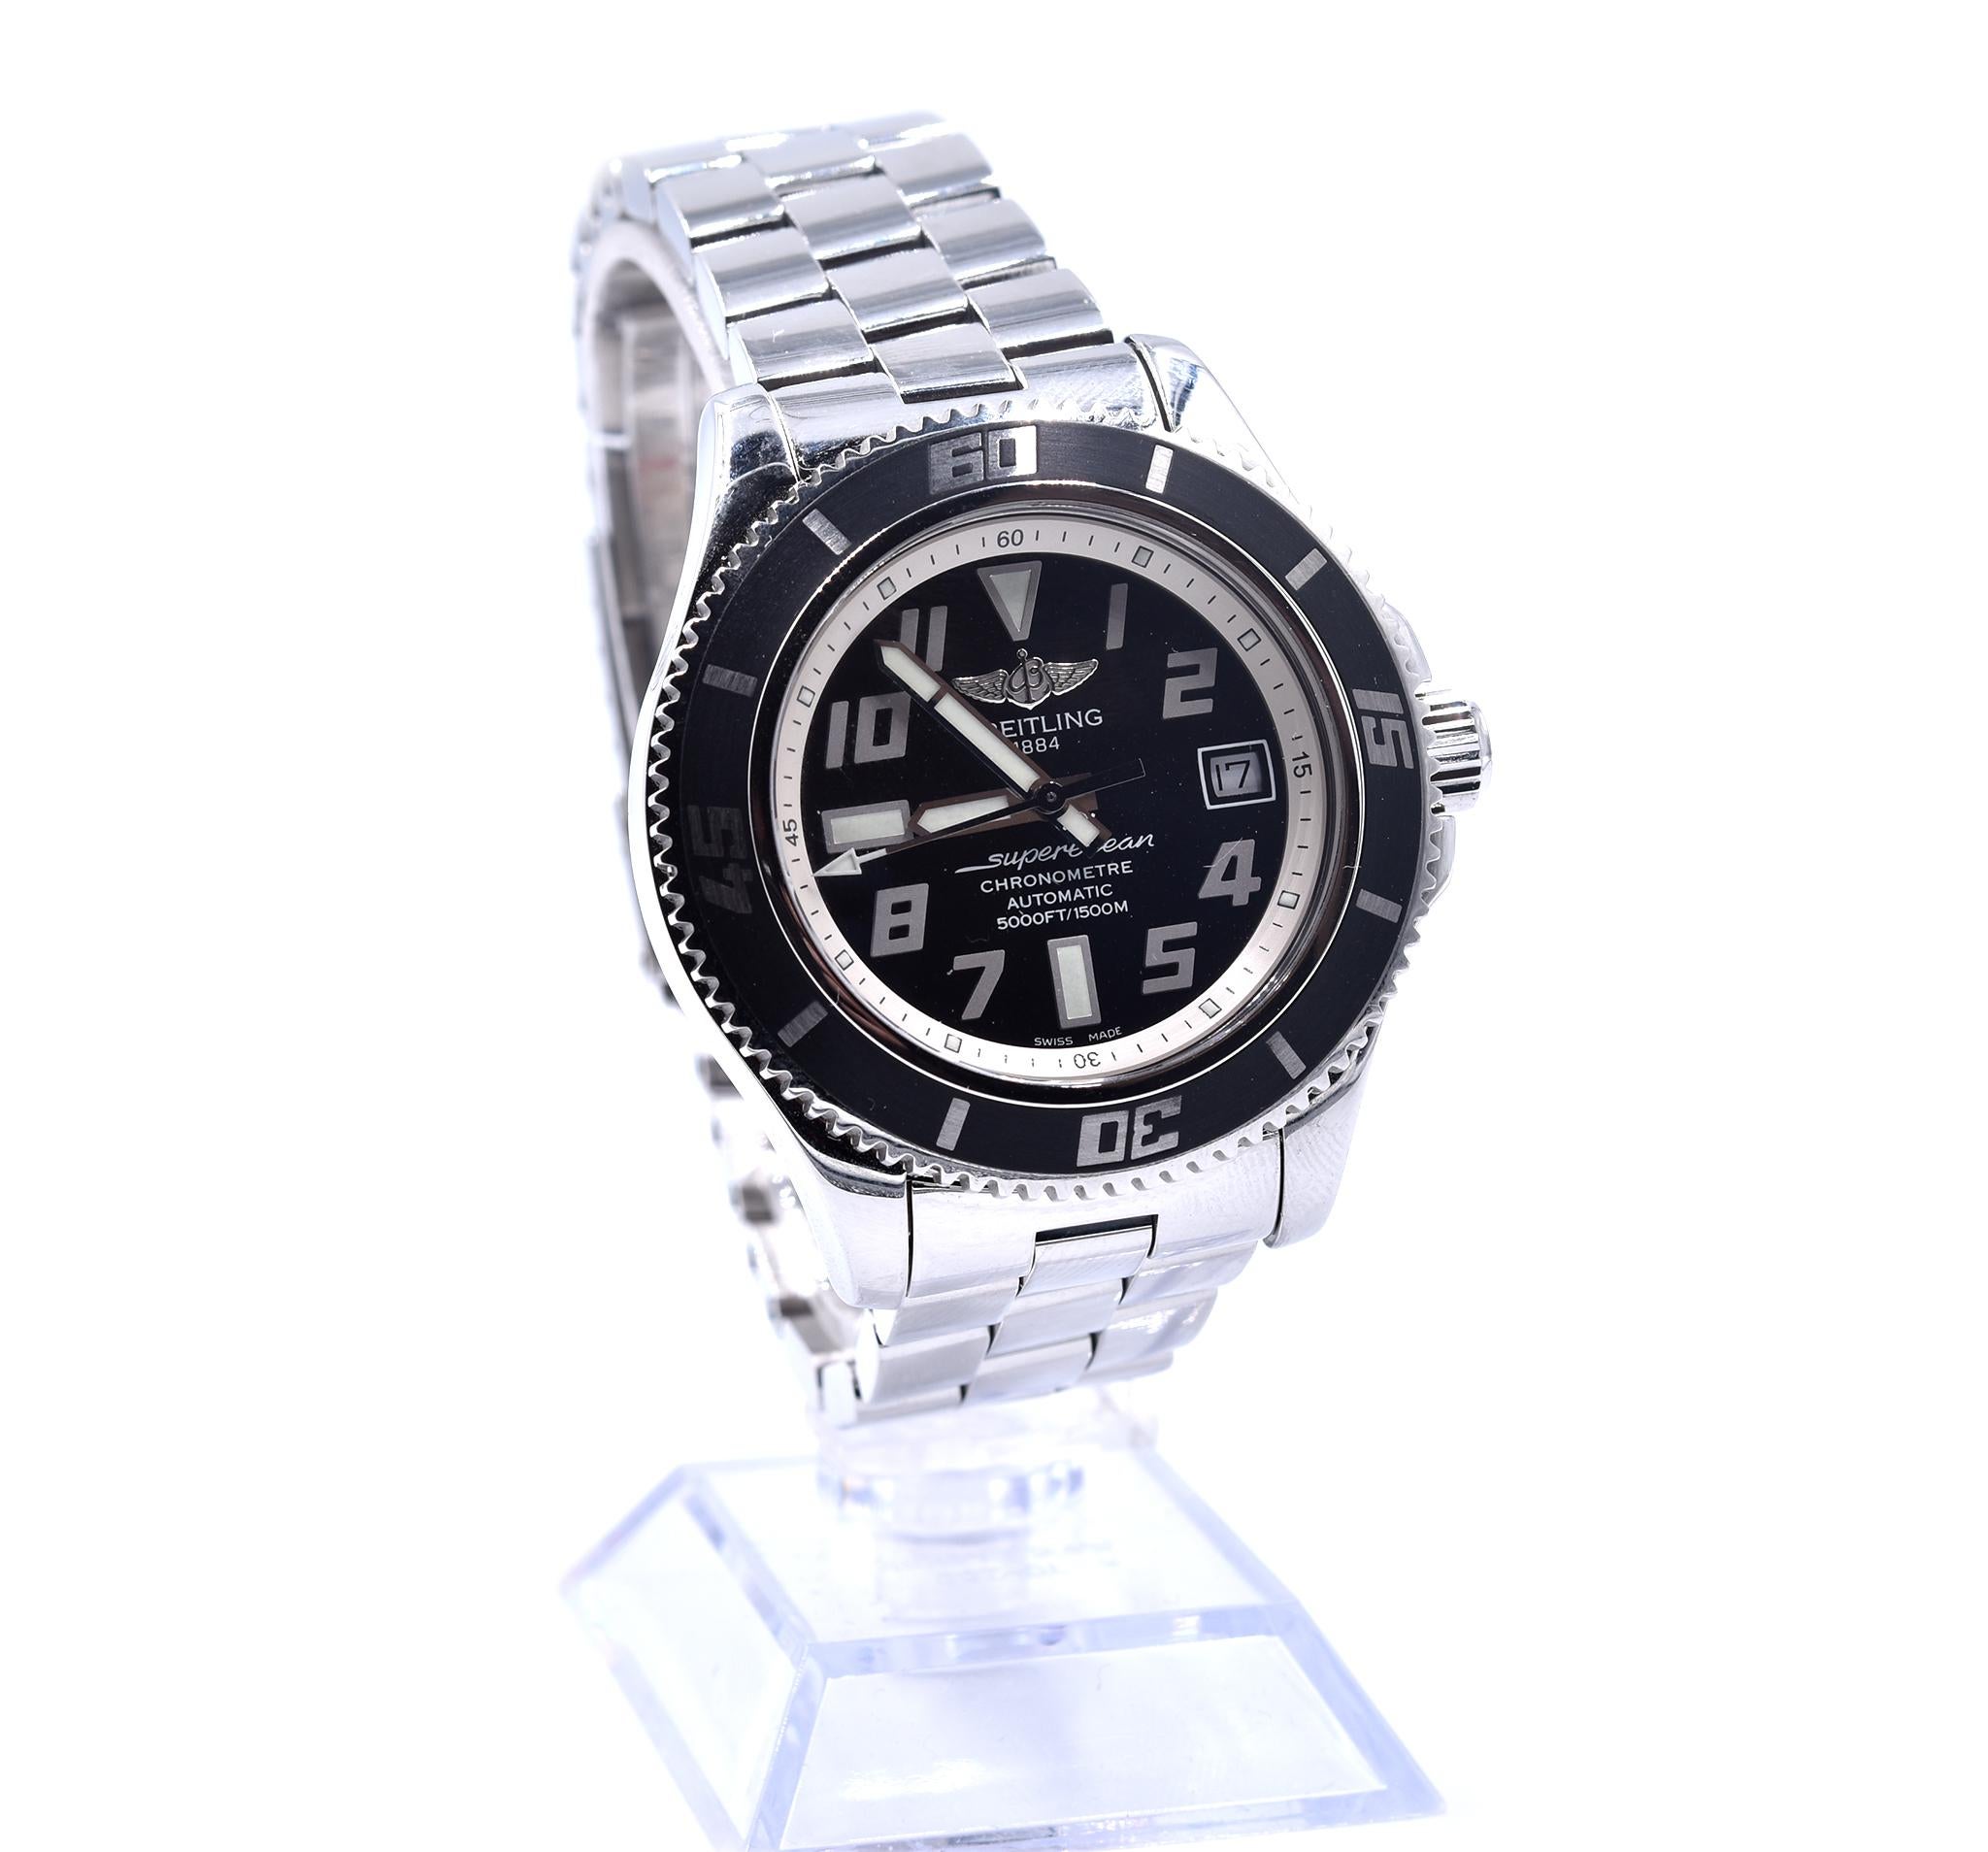 Movement: automatic
Function: hours, minutes, seconds, date indicator, 
Case: 42mm stainless steel case, sapphire protective crystal, screw down crown, uni-directional rotating bezel
Band: stainless steel bracelet with folding clasp, will fit 7 ½